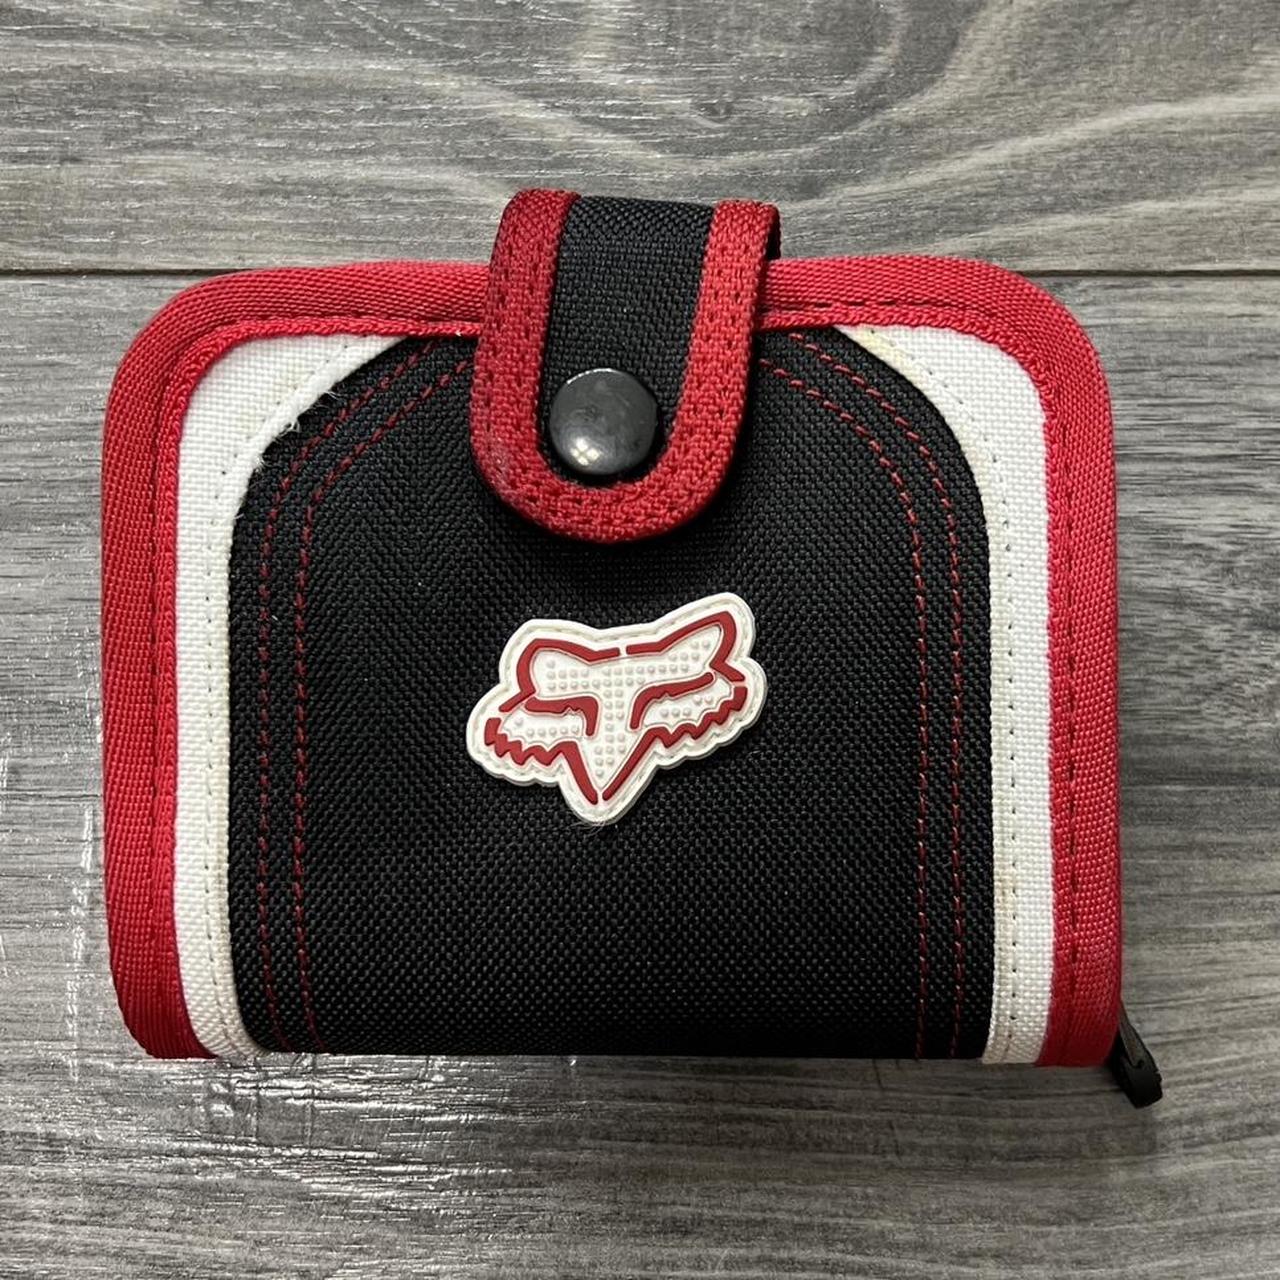 Fox Racing Core Wallet - Cyclelife Pickering 905-837-2906 Port Perry 905  985-6767